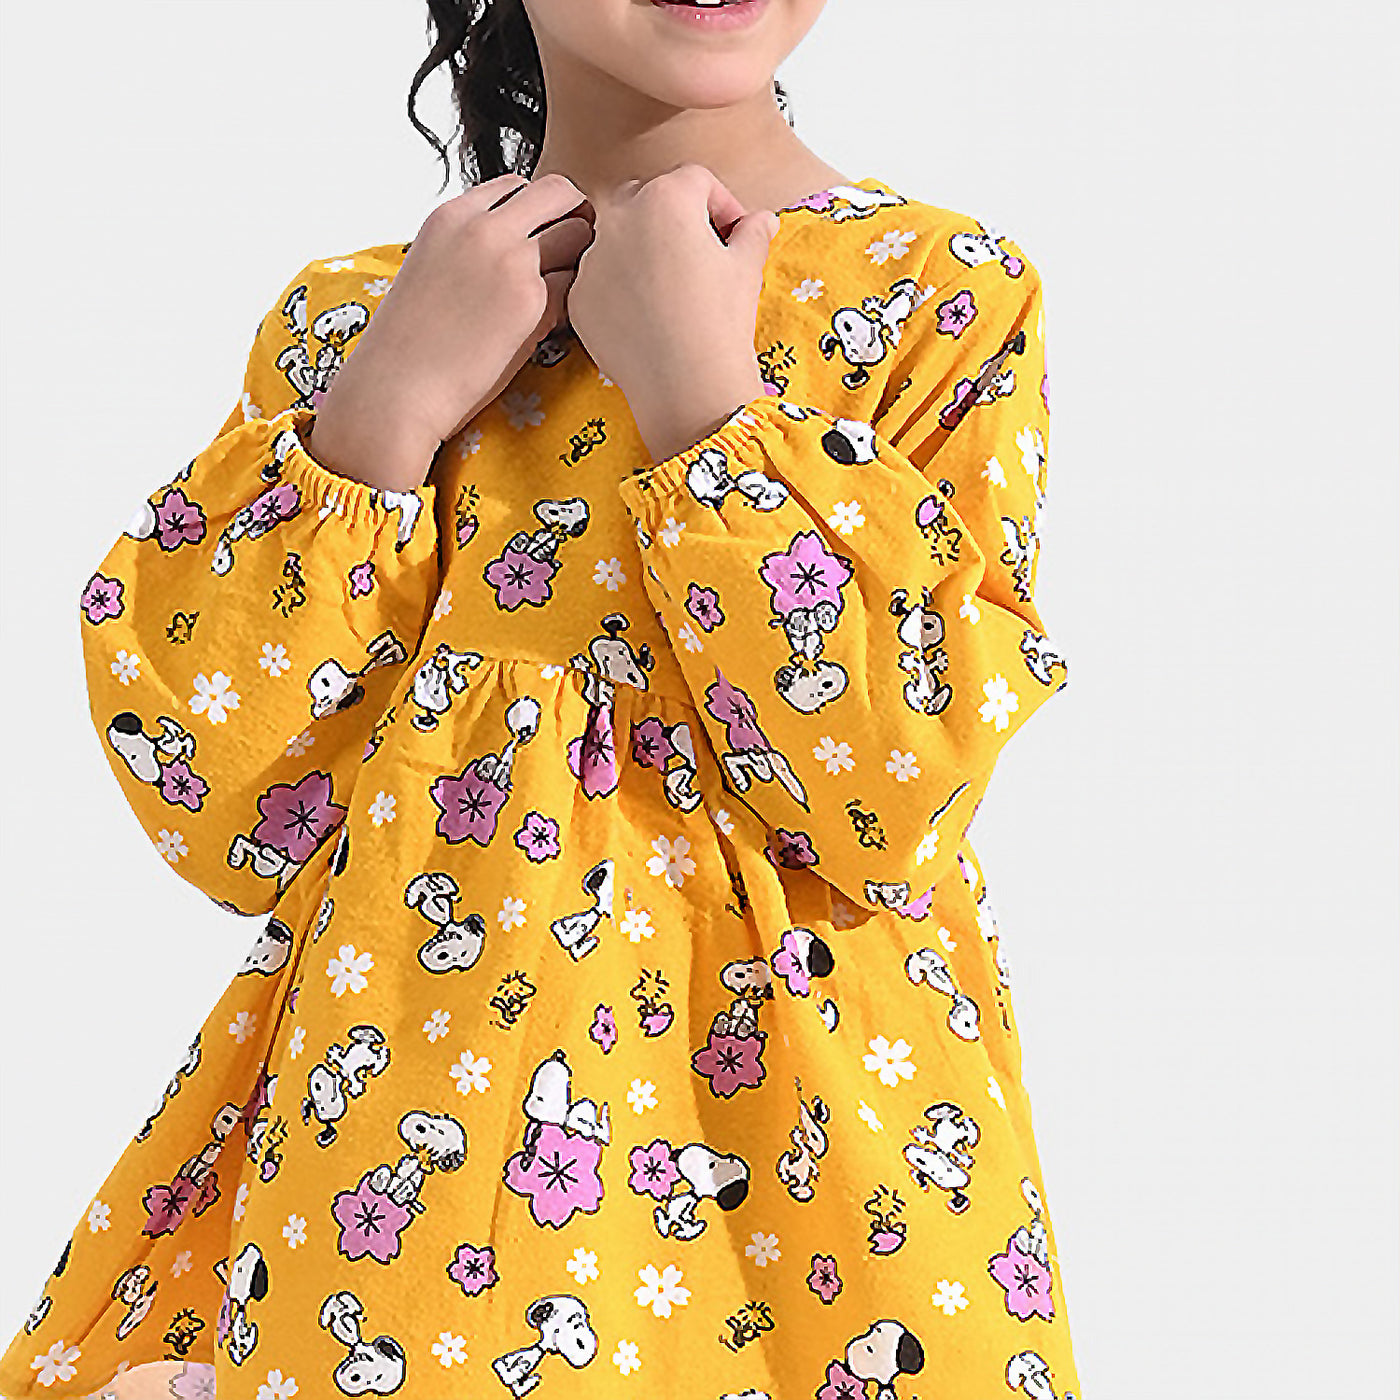 Girls Flannel Co-ord Set Snoopy Flower-Citrus